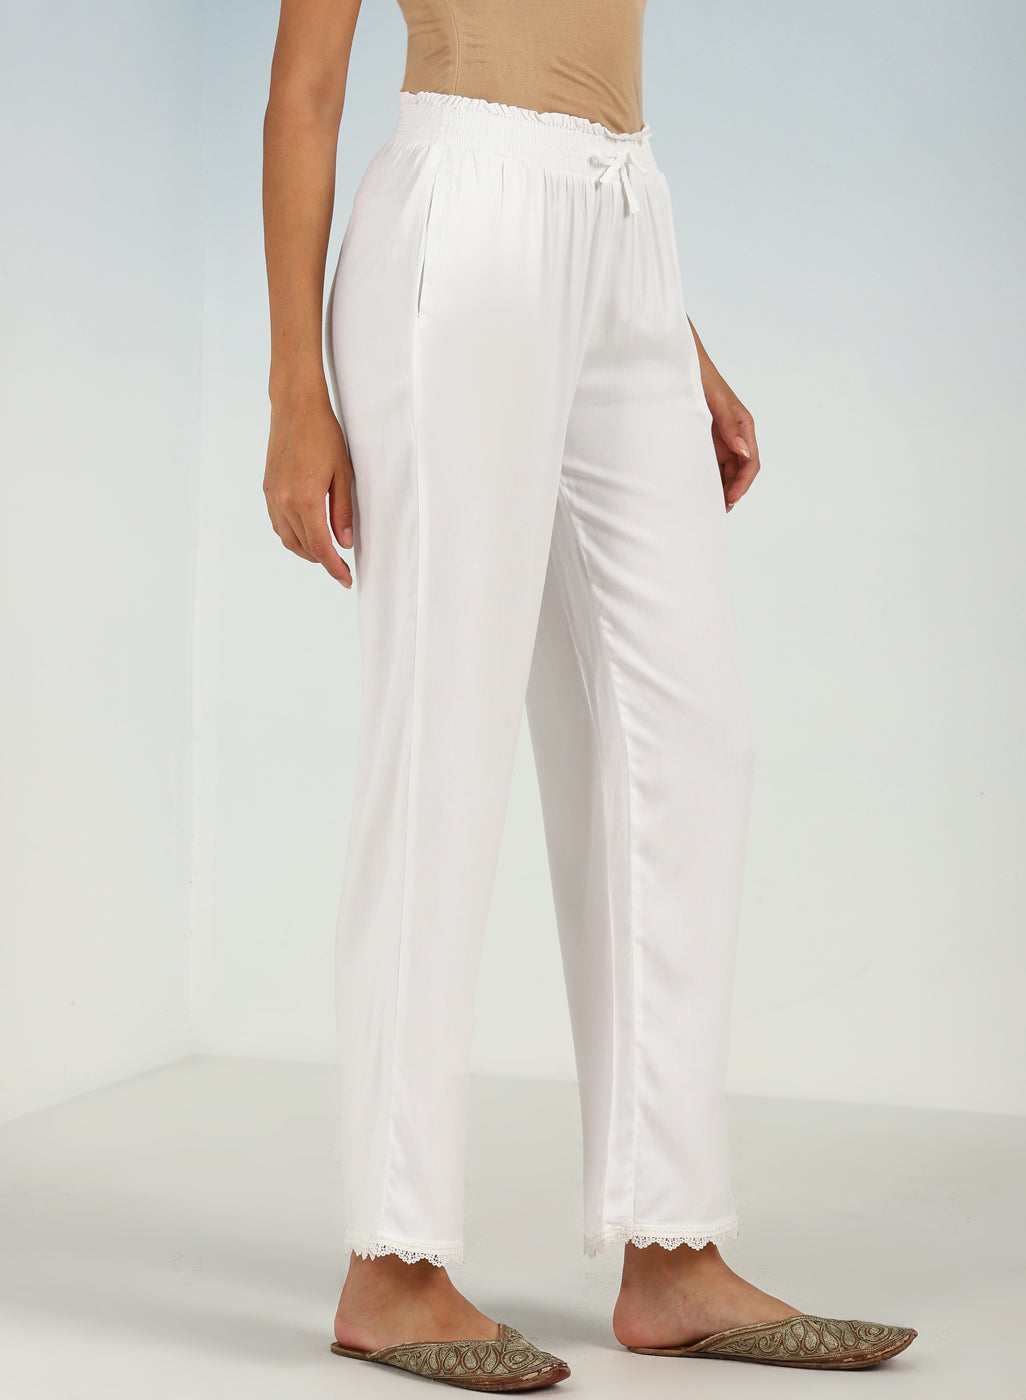 Ivory Ankle-length Pants for Women with drawstring Waist and Lace Work on  the Hem HP0425-12 – Lakshita